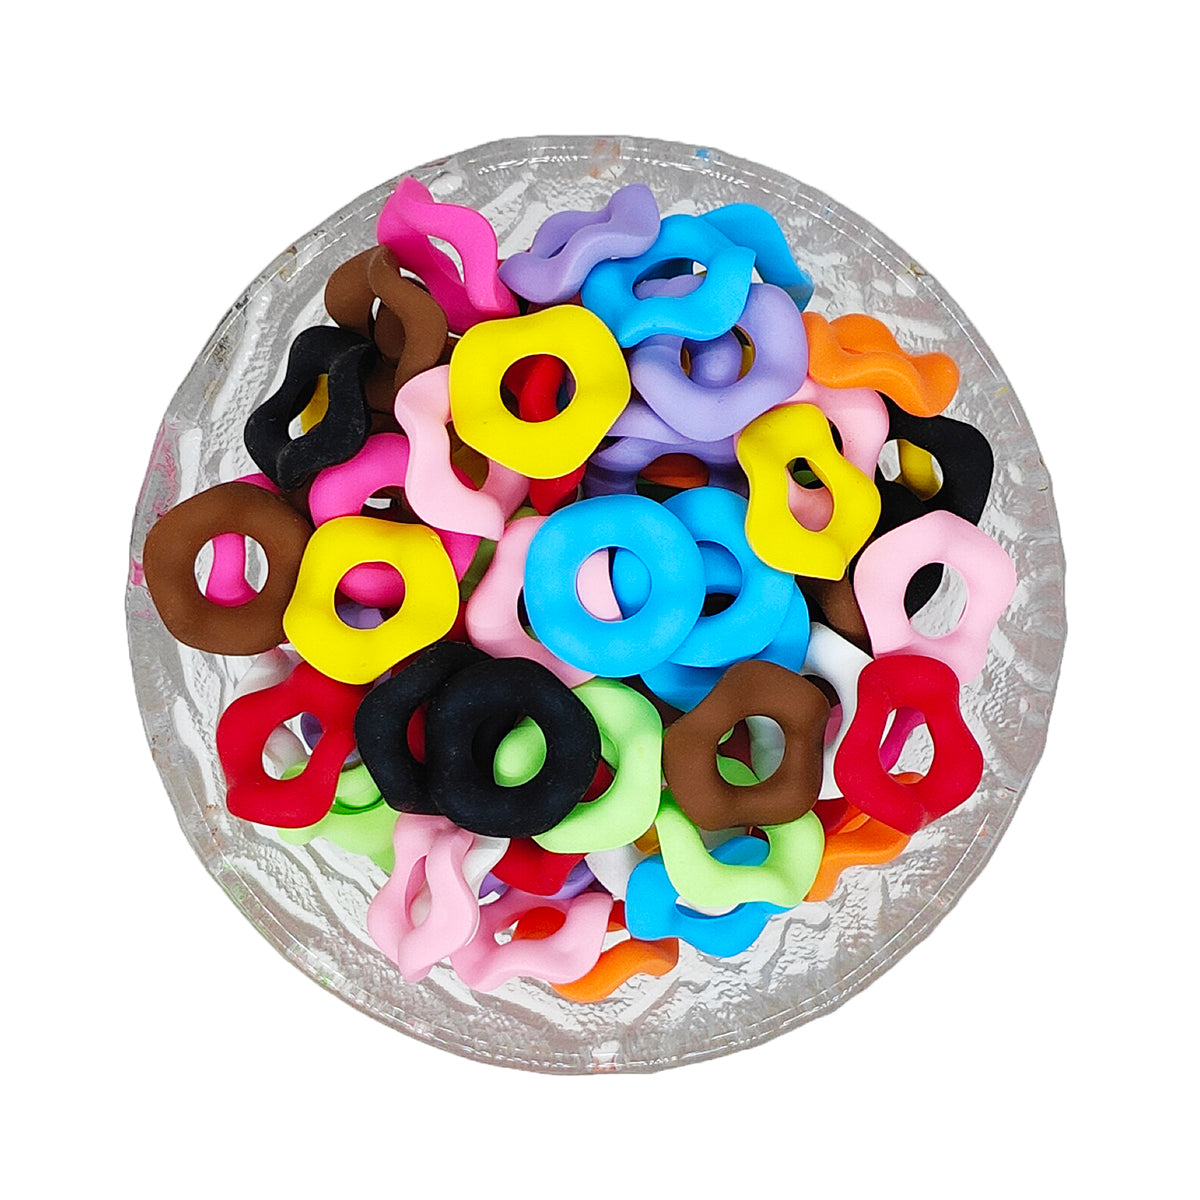 16mm Mix Wavy Spacer Beads,Flat Disk Beads